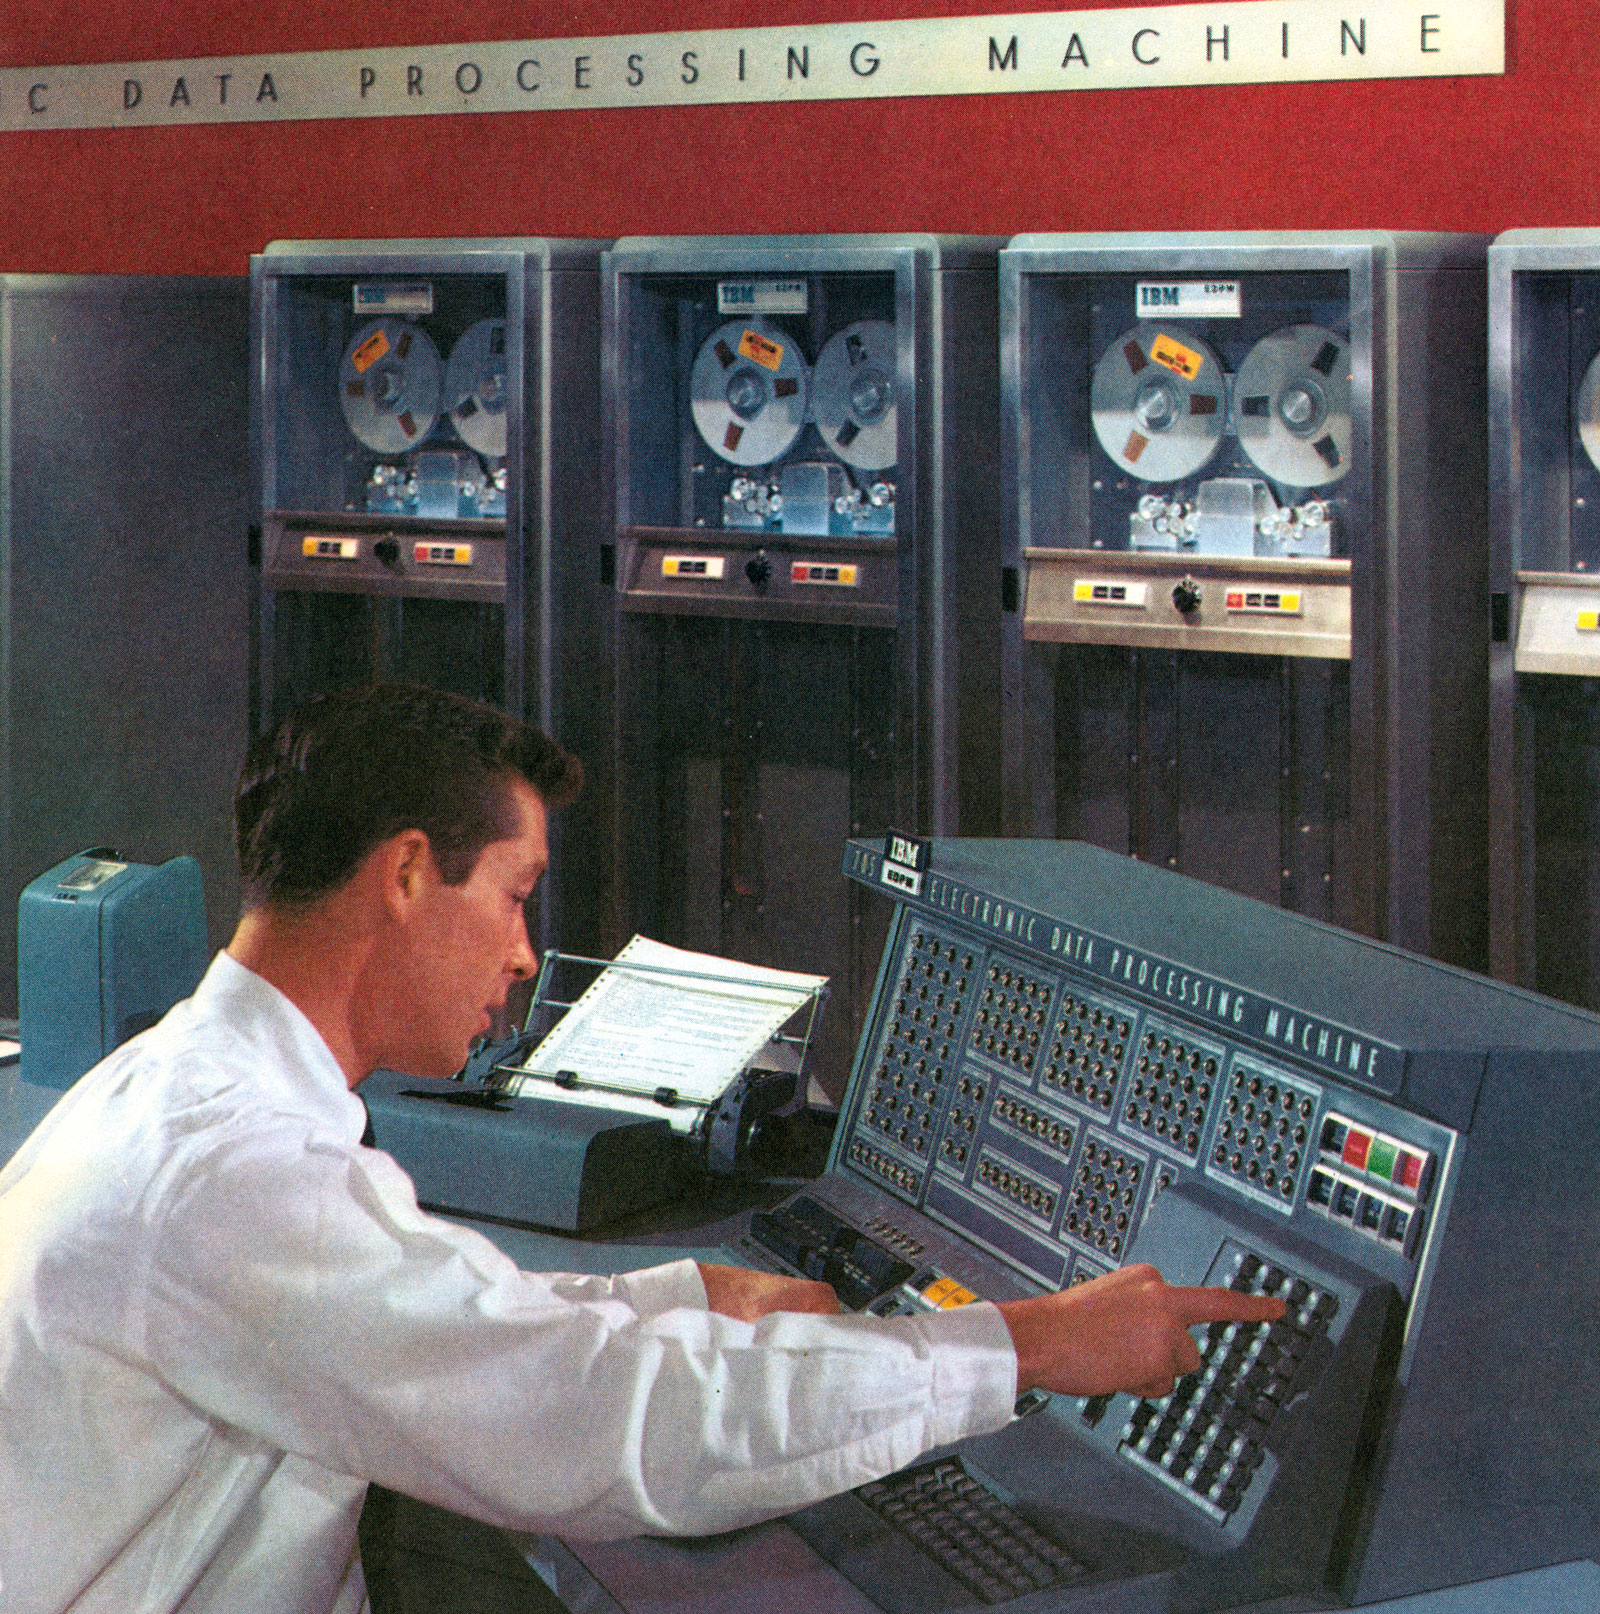 An illustration showing a computer technician operating an early data processing machine, 1950s